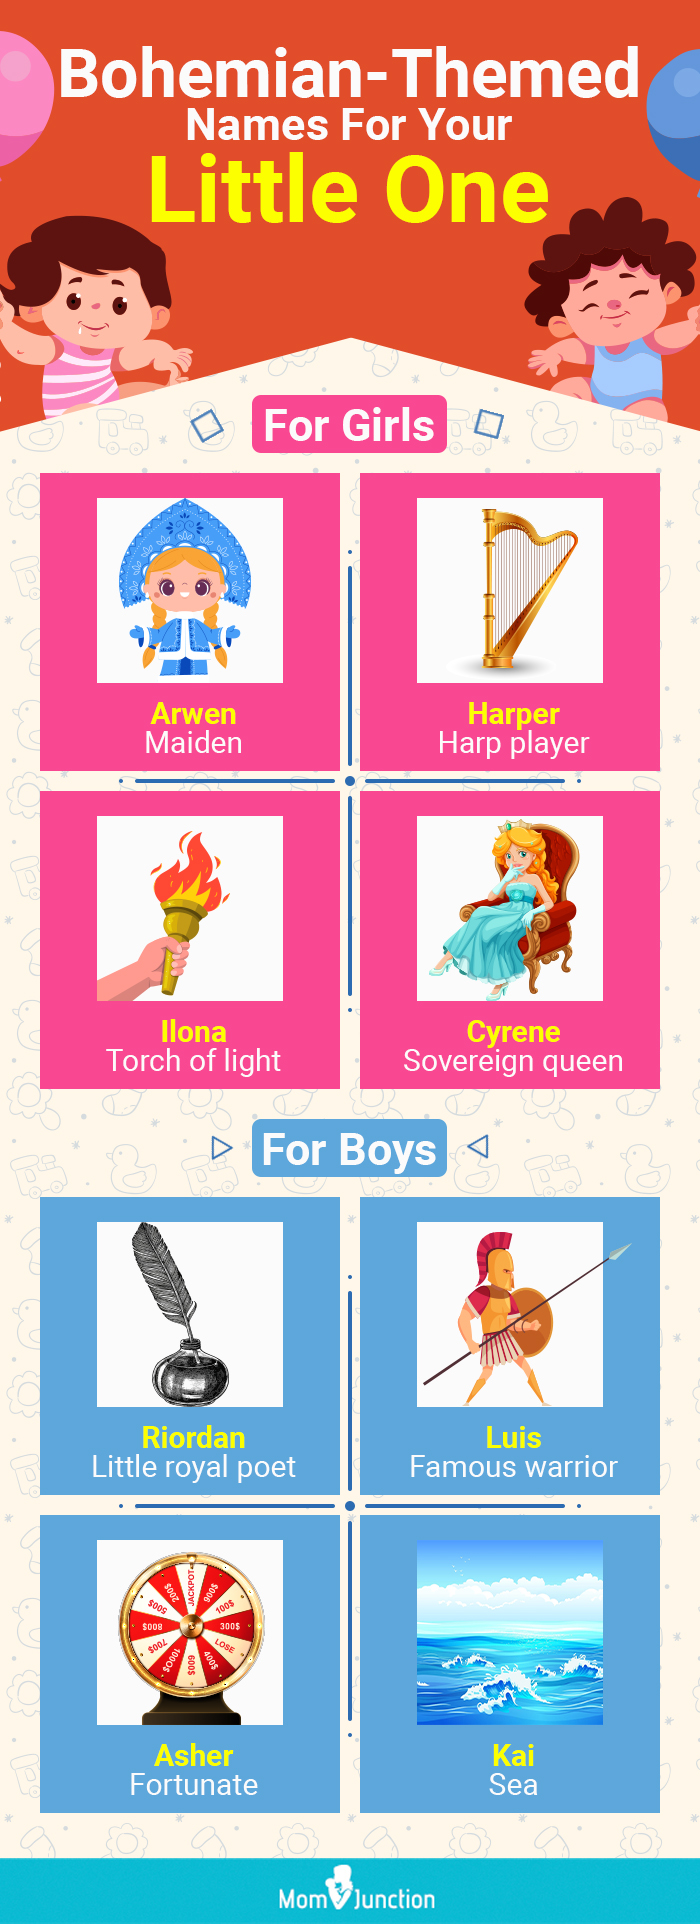 bohemian themed names for your little one (infographic)